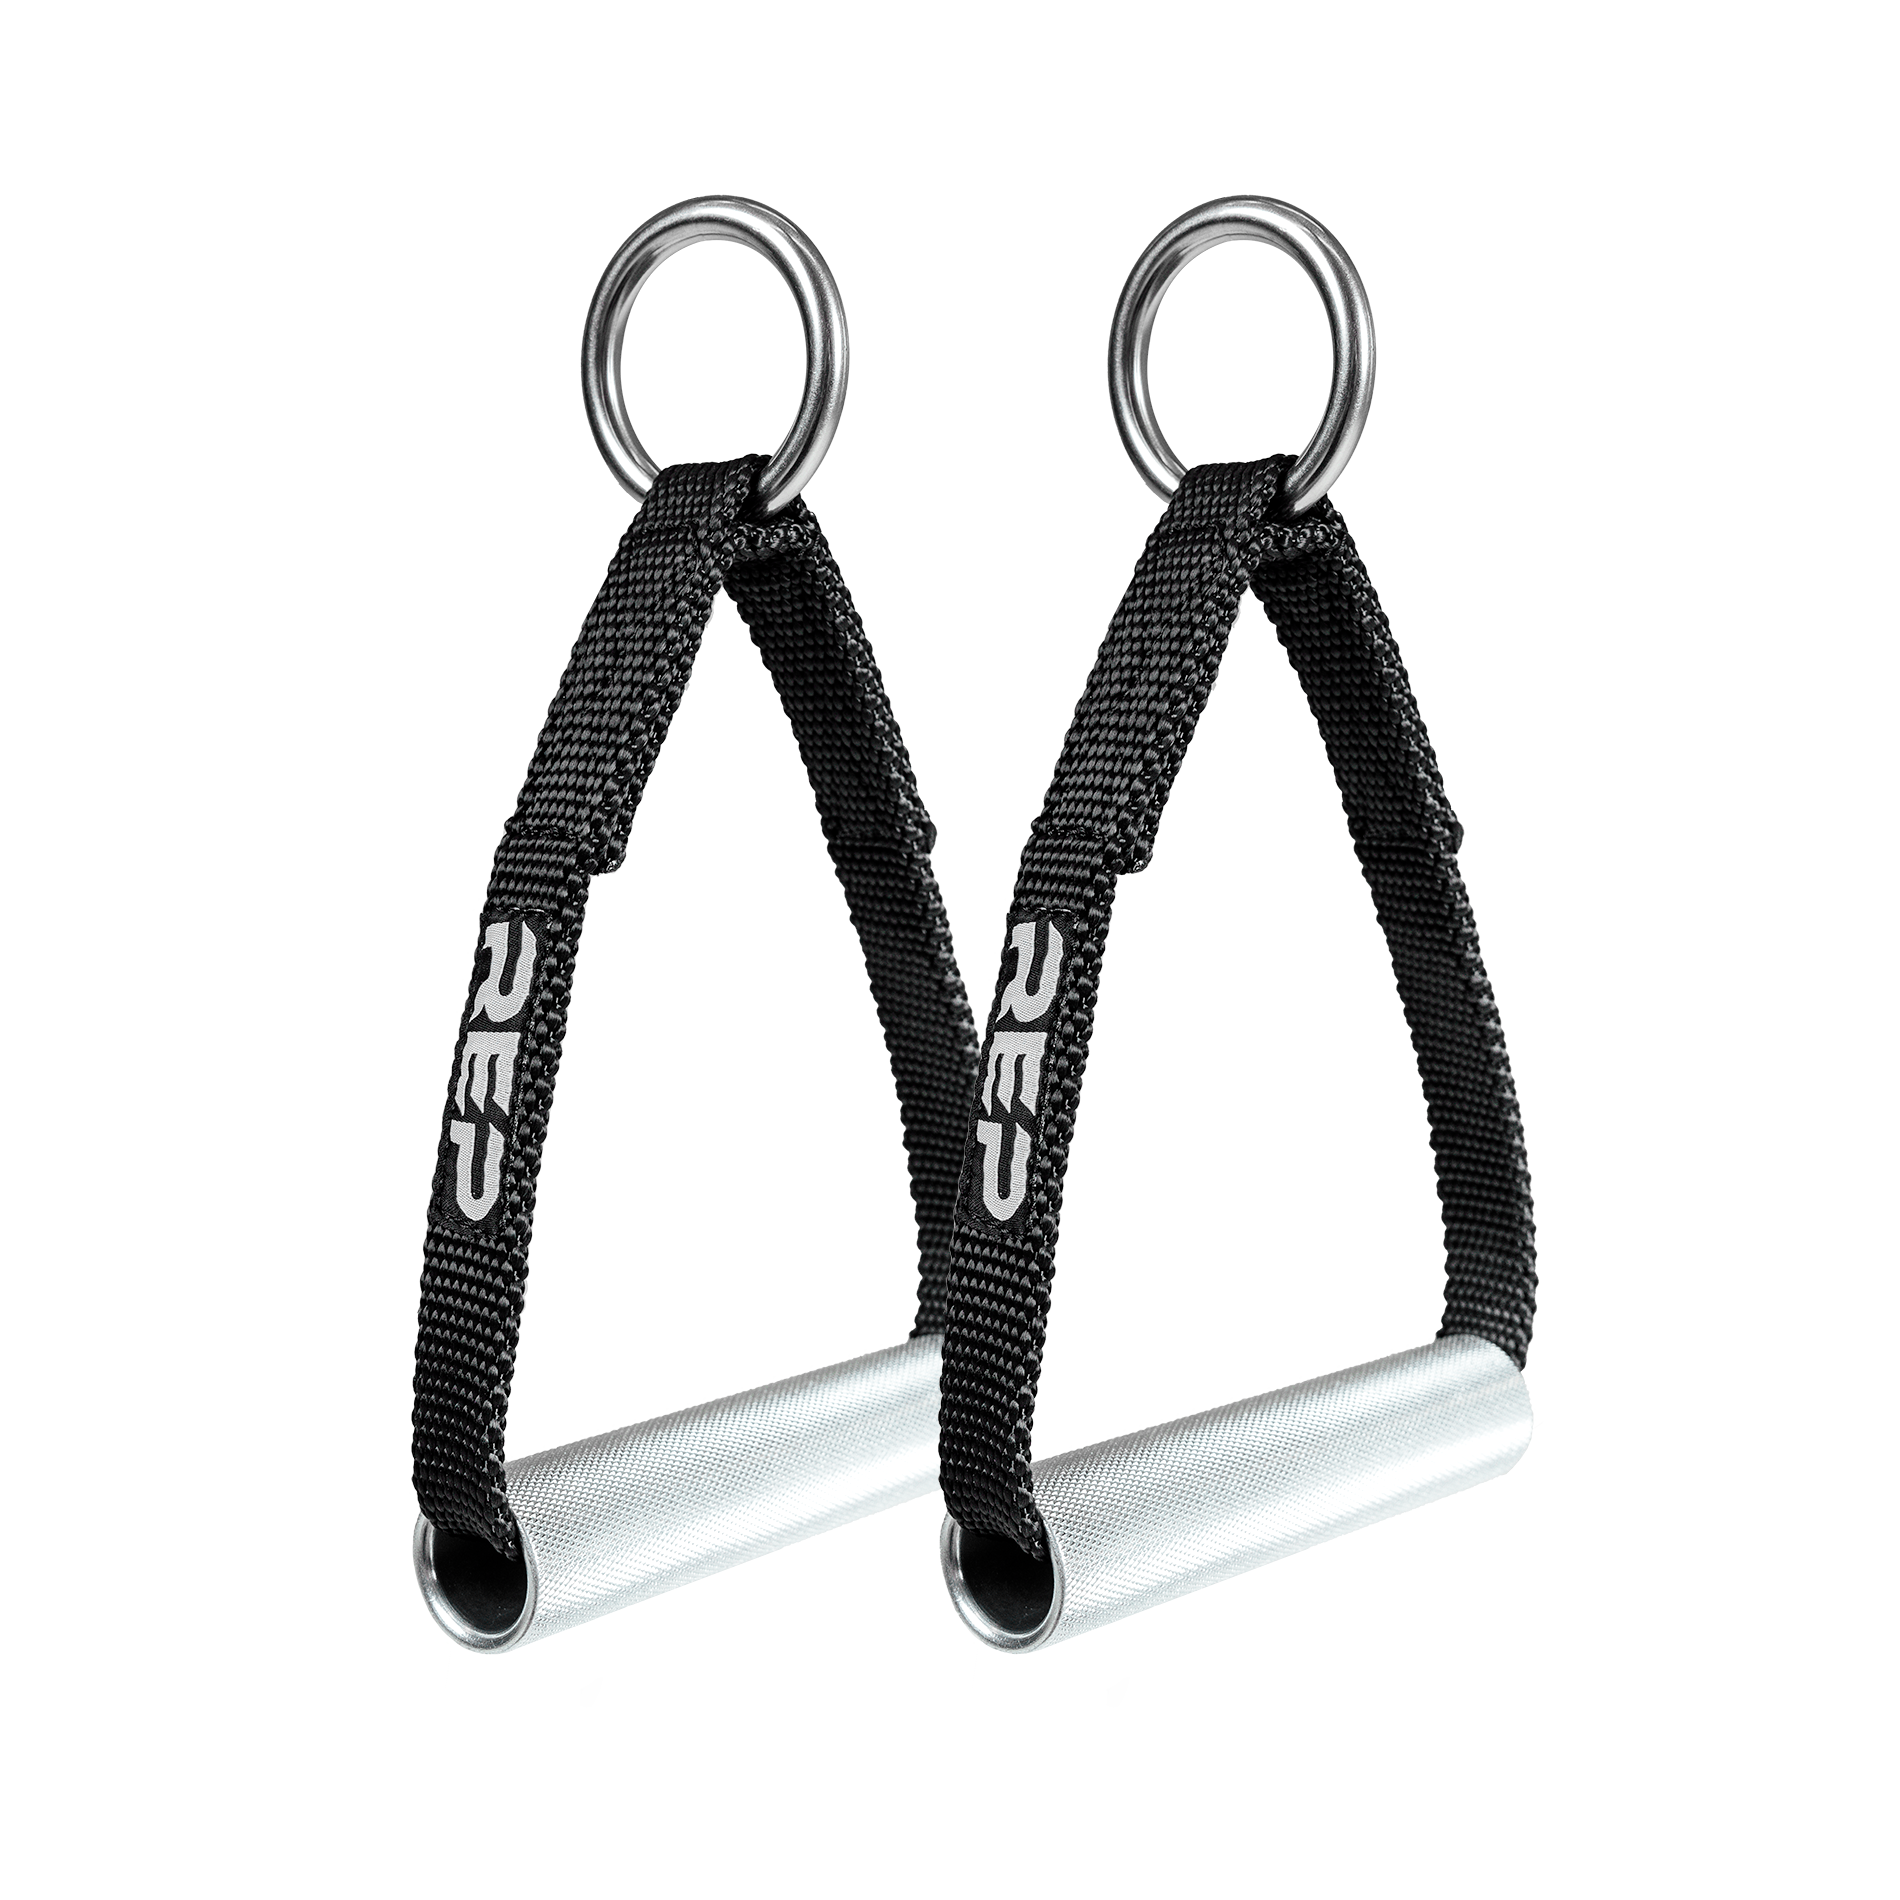 ISF Tricep Rope Cable Attachment, with Double D Handles Gym